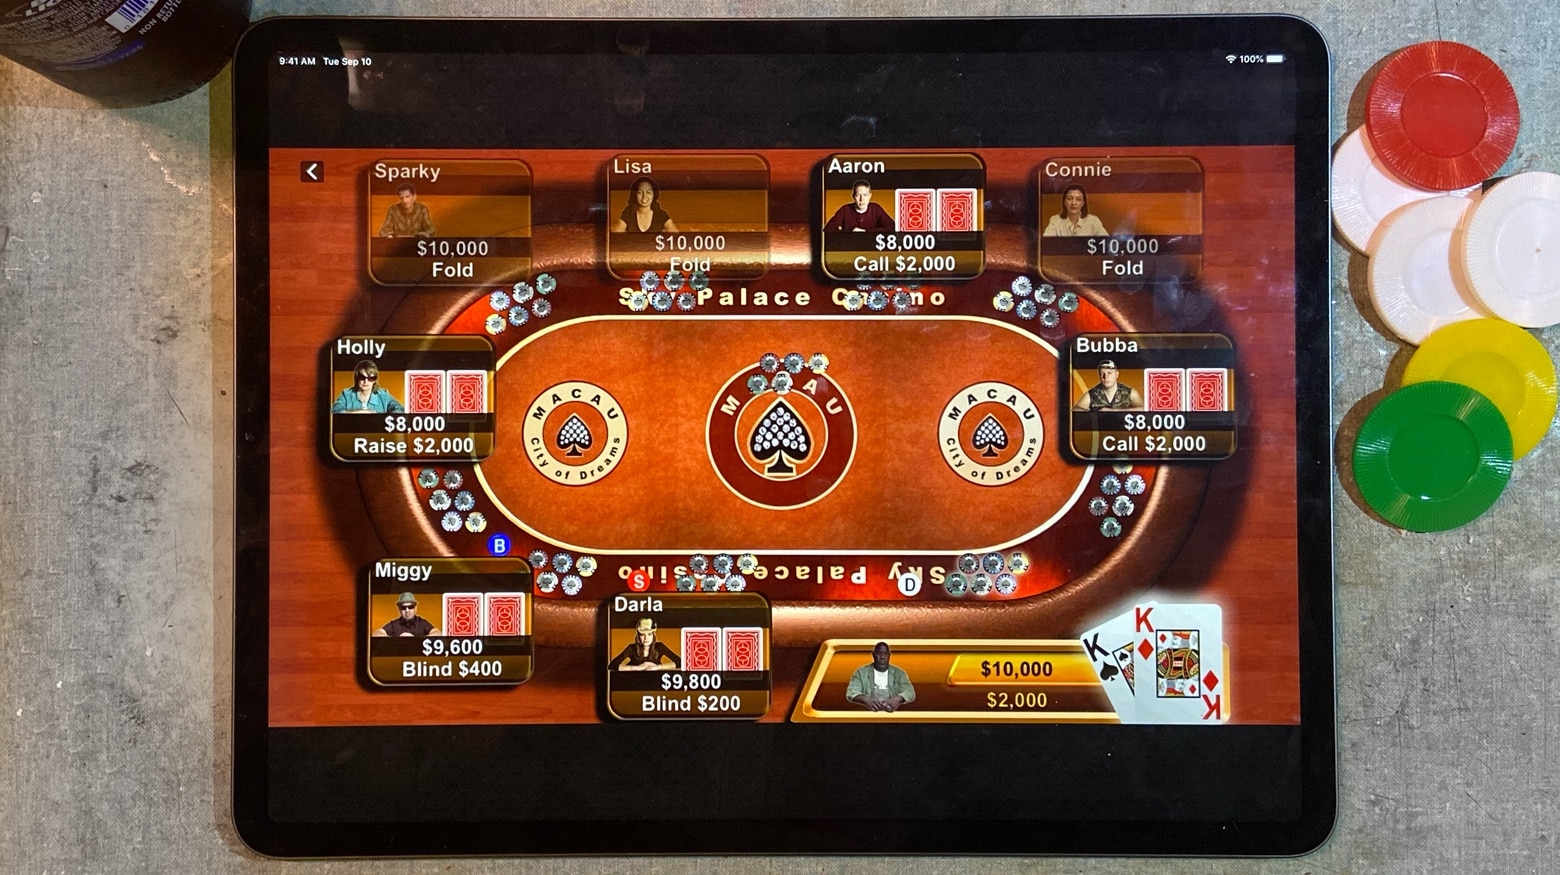 Now you can play Apple's classic poker game Texas Hold'em on iPad.